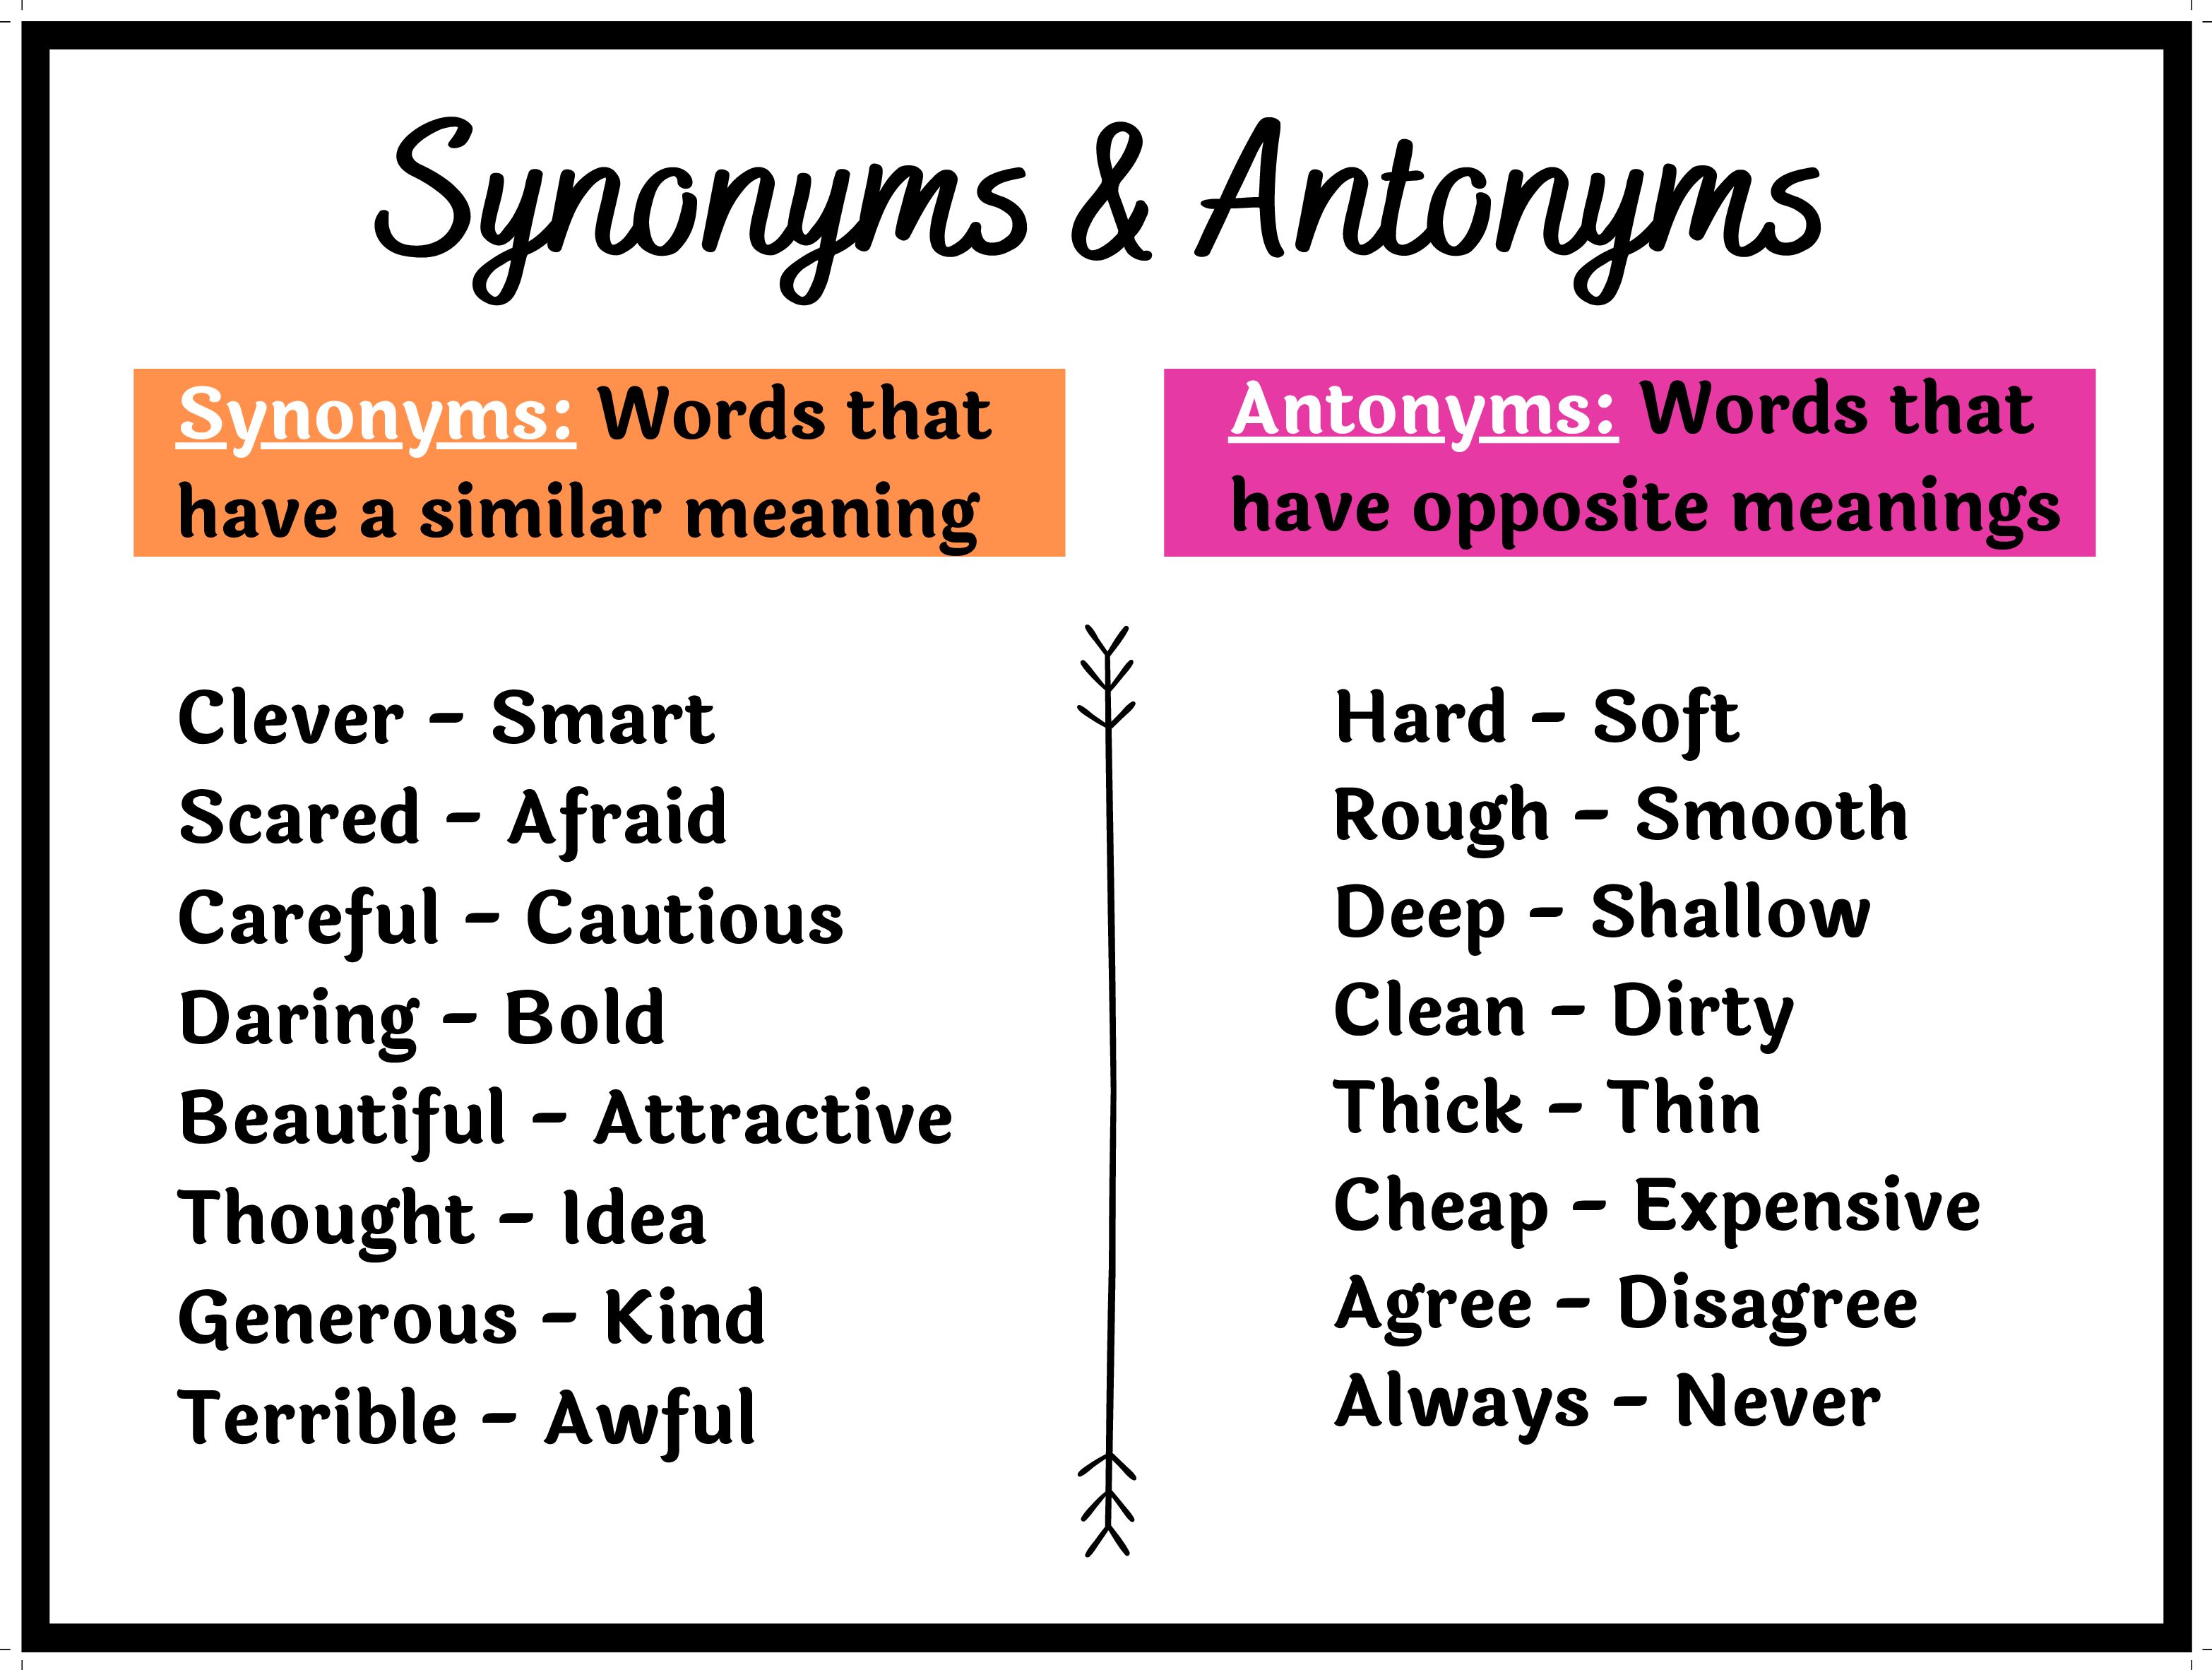 72 Synonyms & Antonyms For Naughty